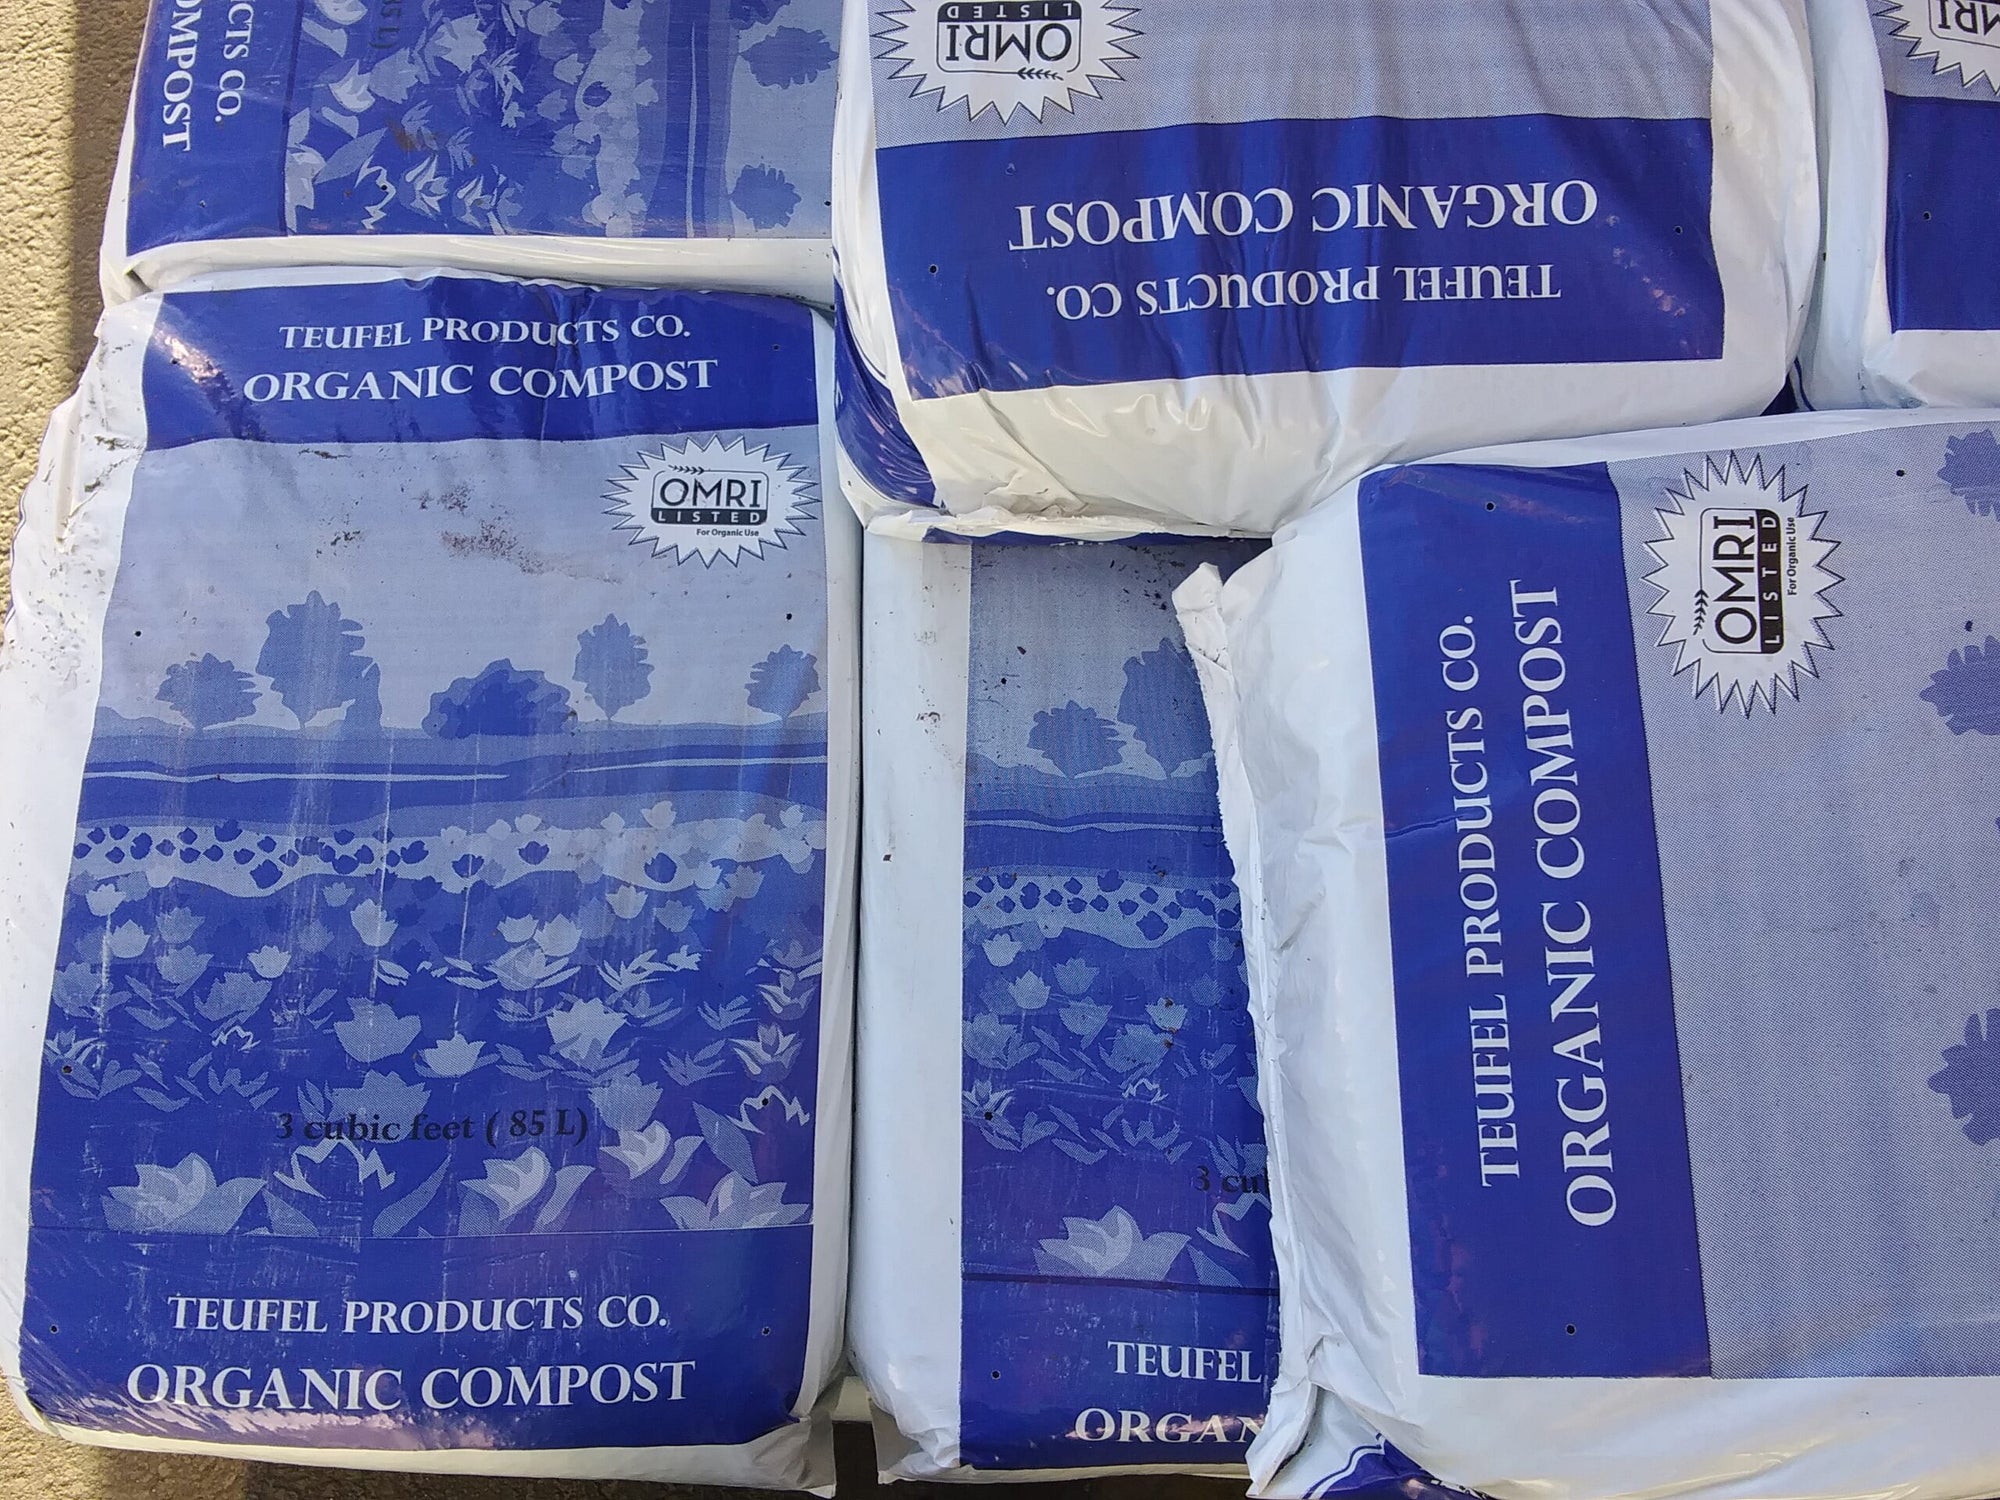 Large blue and white bags of compost stacked on each other.